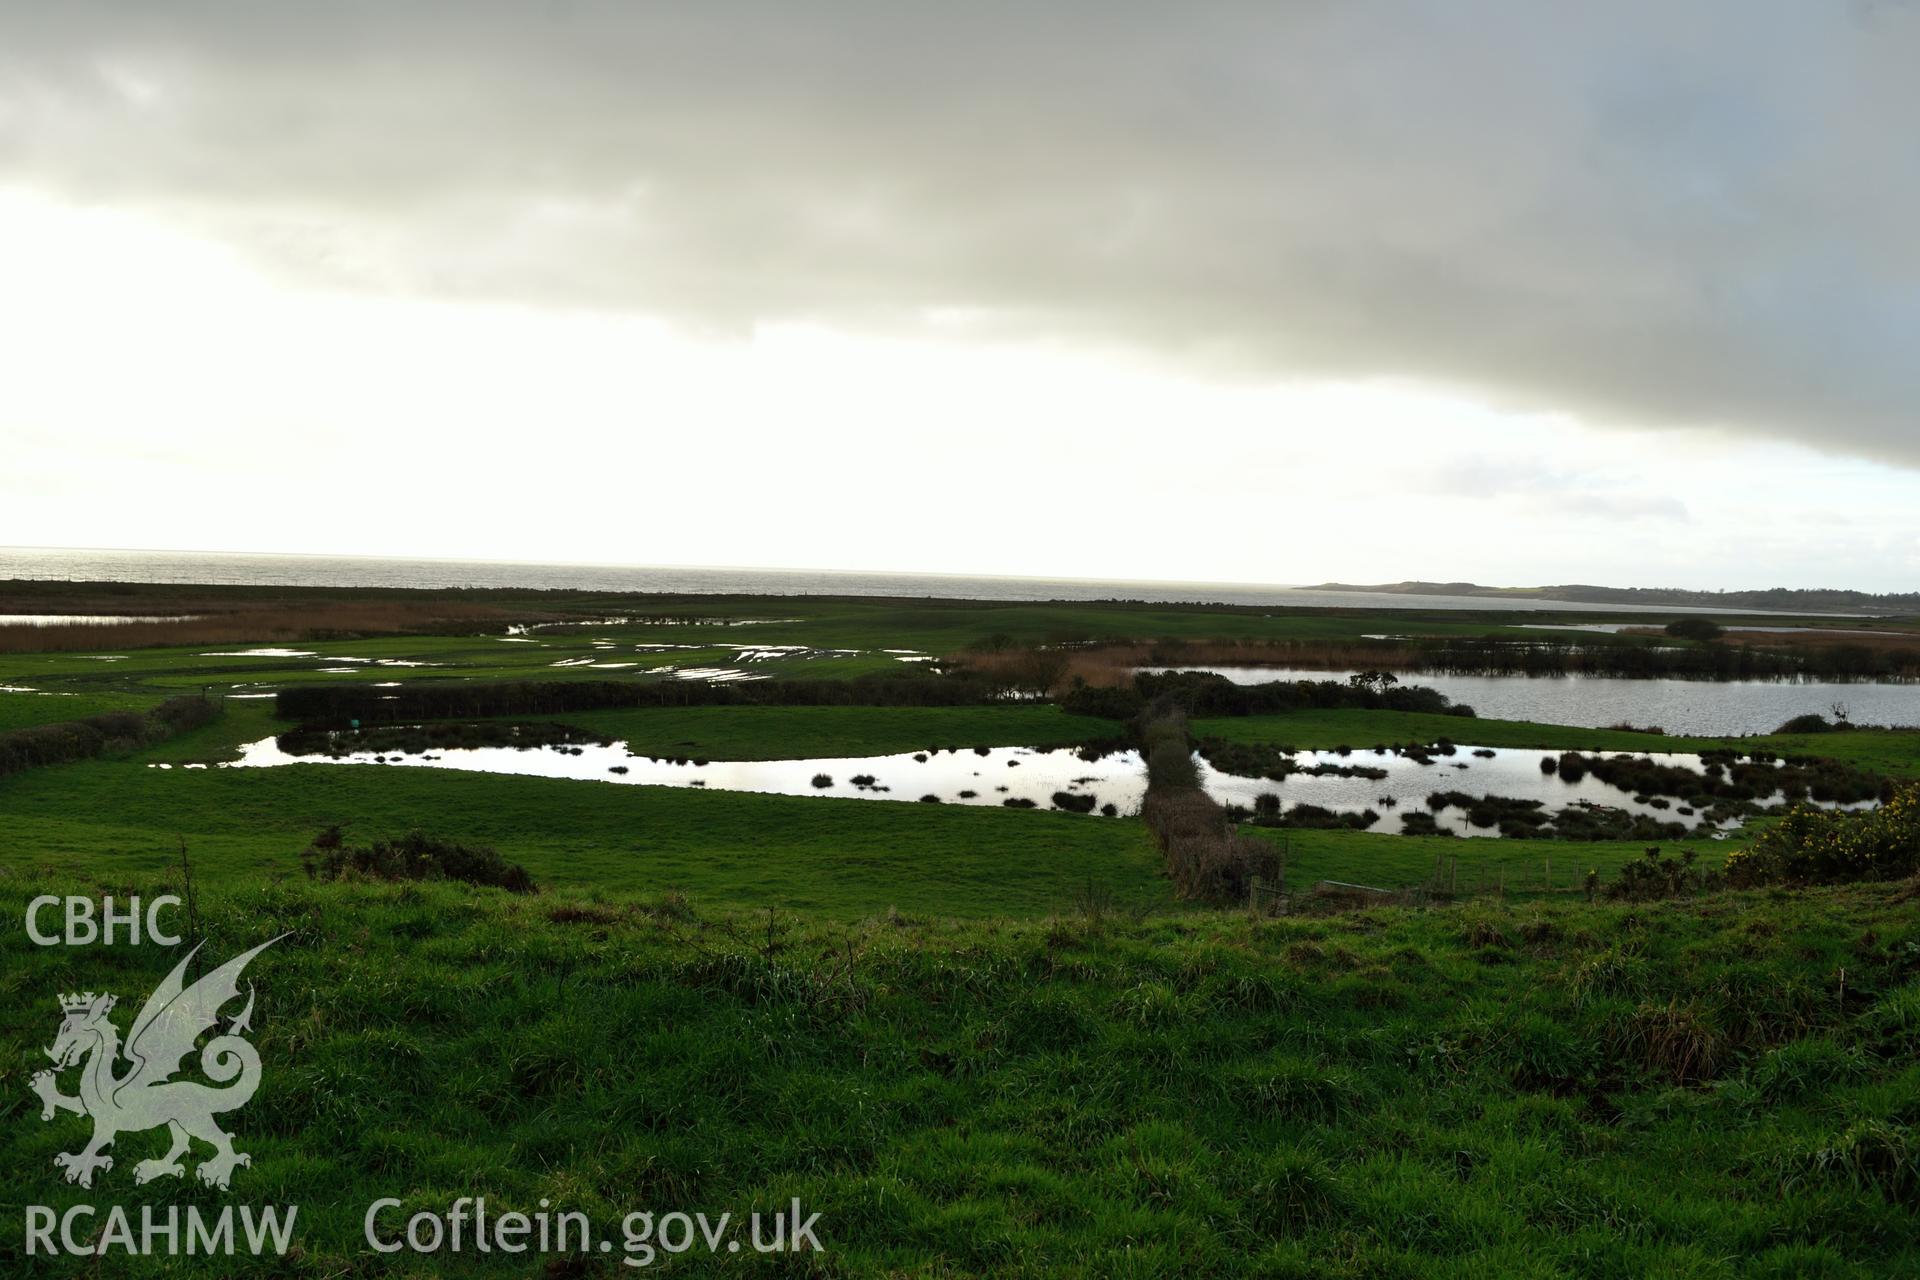 View of salt marsh and Cardigan Bay from south edge of Tomen Fawr. Photographed by Gwynedd Archaeological Trust during impact assessment of the site on 20th December 2018. Project no. G2564.